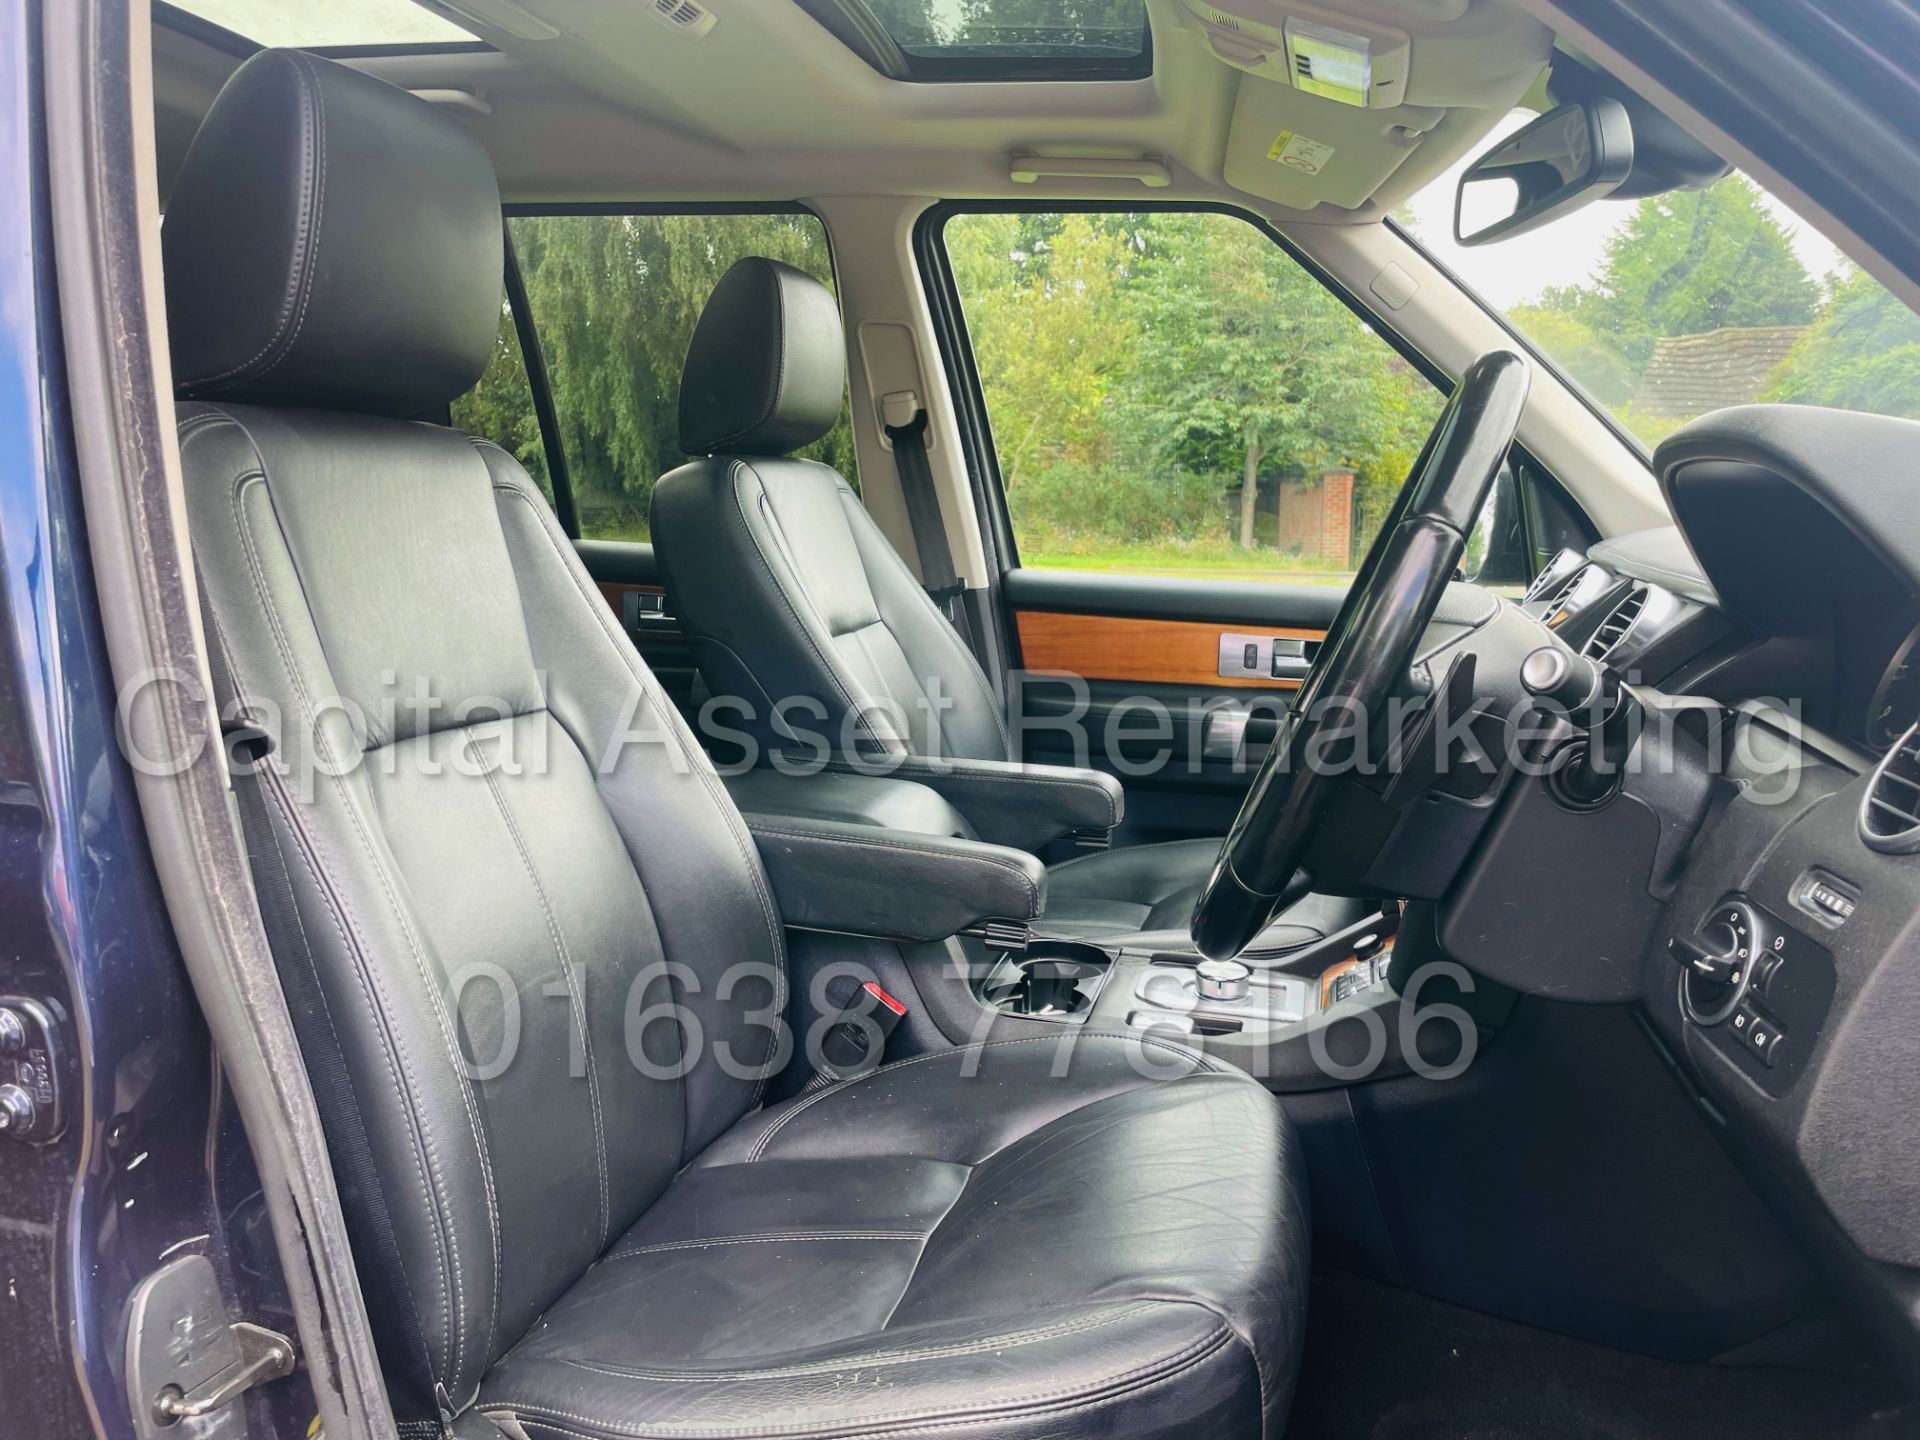 LAND ROVER DISCOVERY 4 *HSE* 7 SEATER SUV (2014 - NEW MODEL) '3.0 SDV6 - 255 BHP - 8 SPEED AUTO' - Image 42 of 61